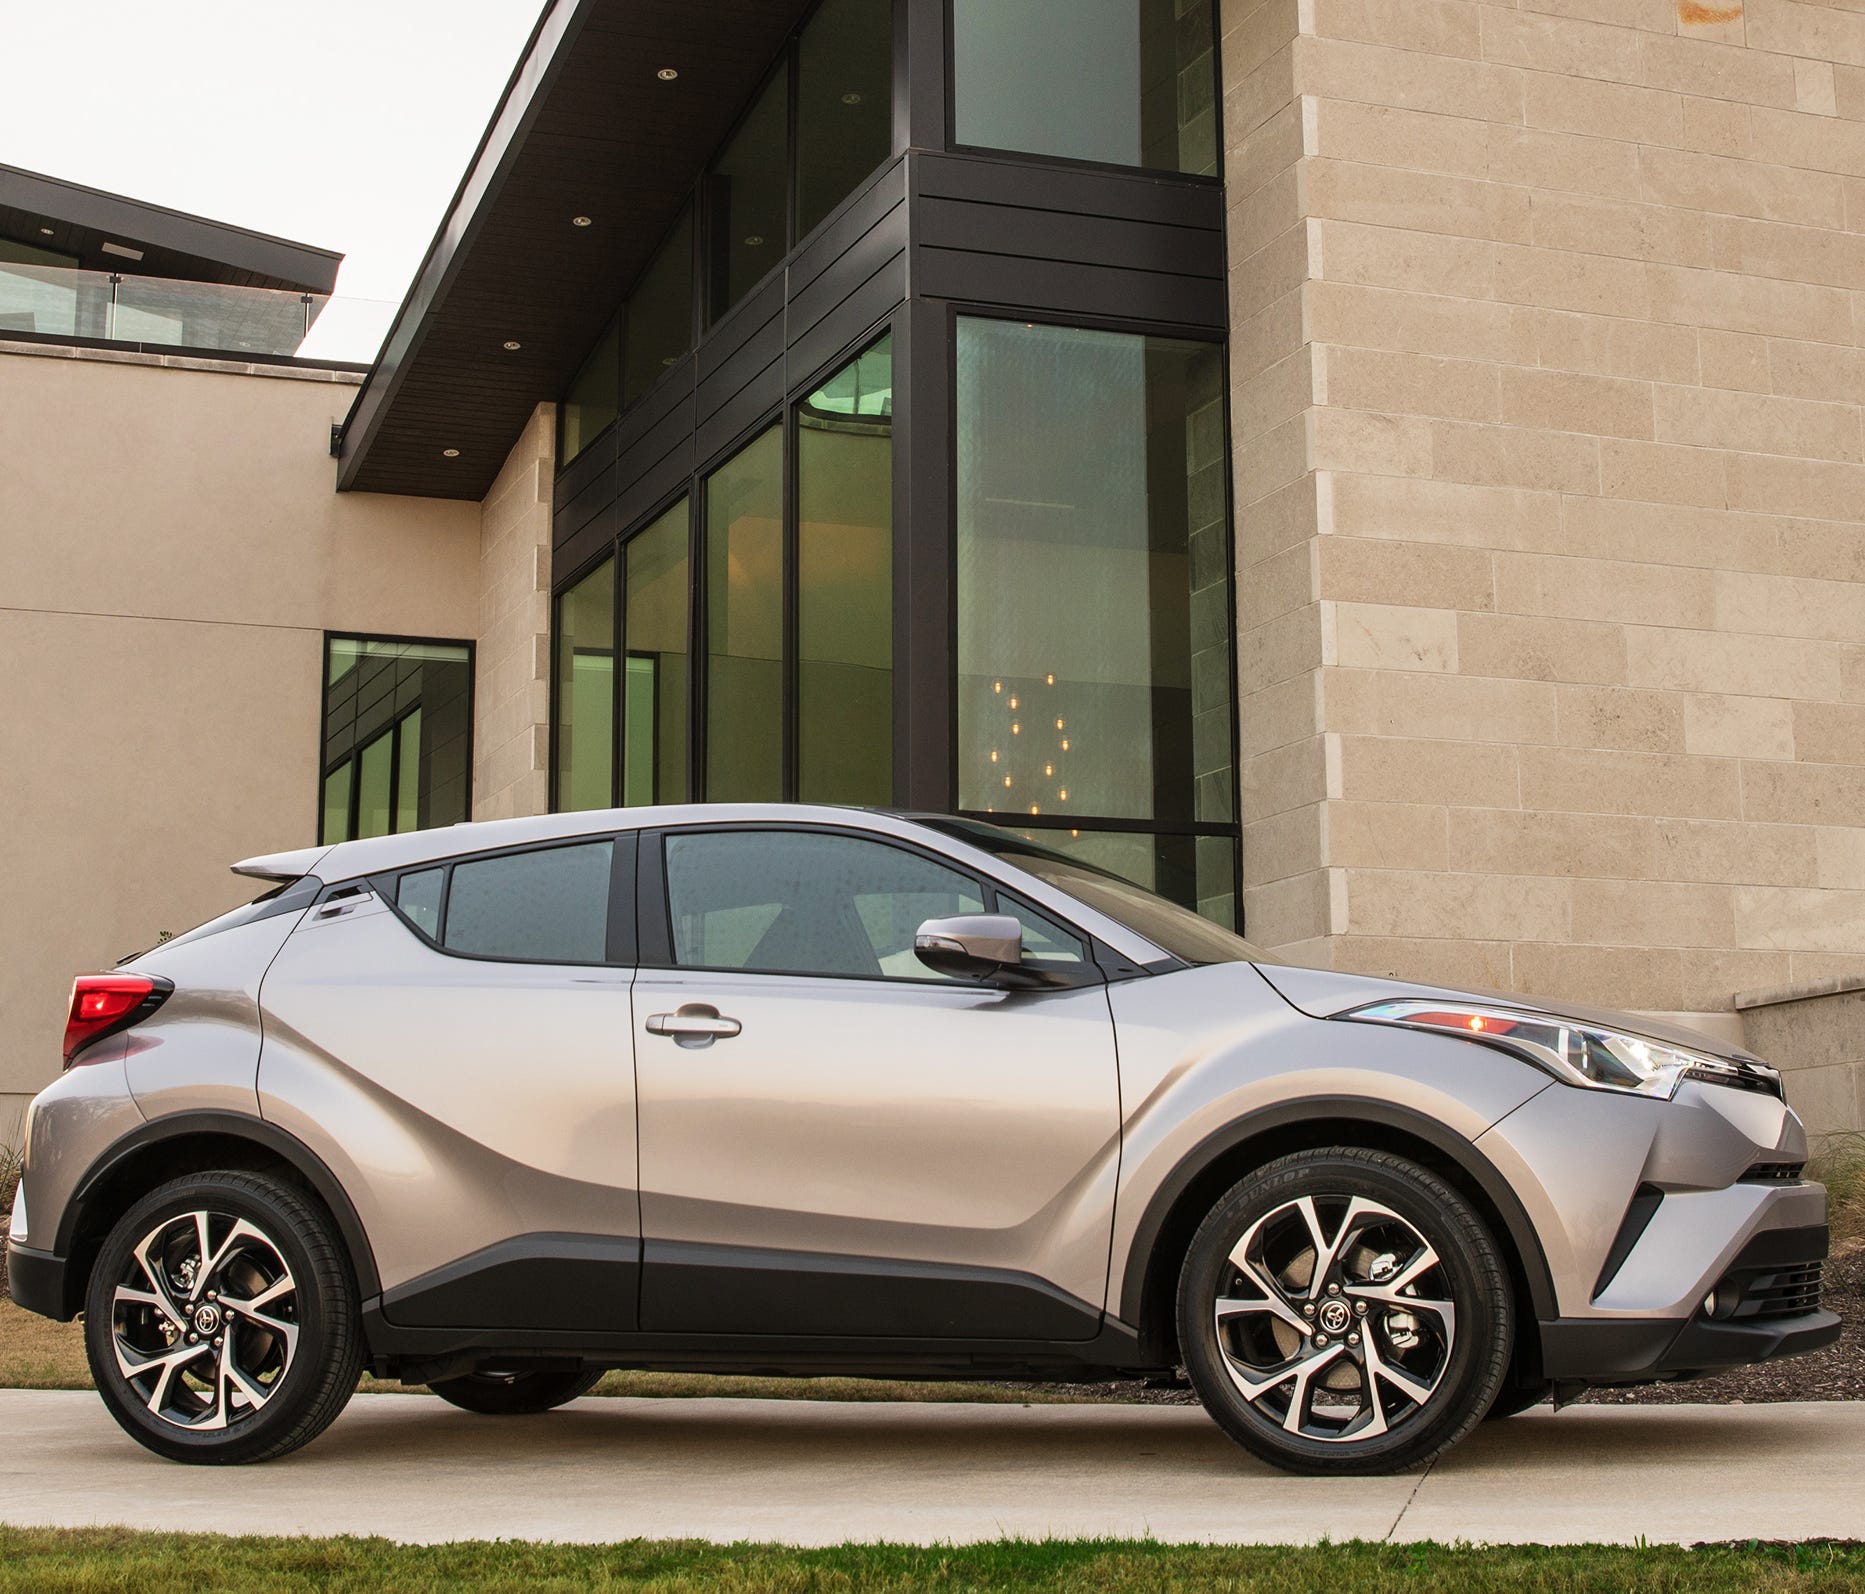 Toyota may capture some hearts with its new C-HR